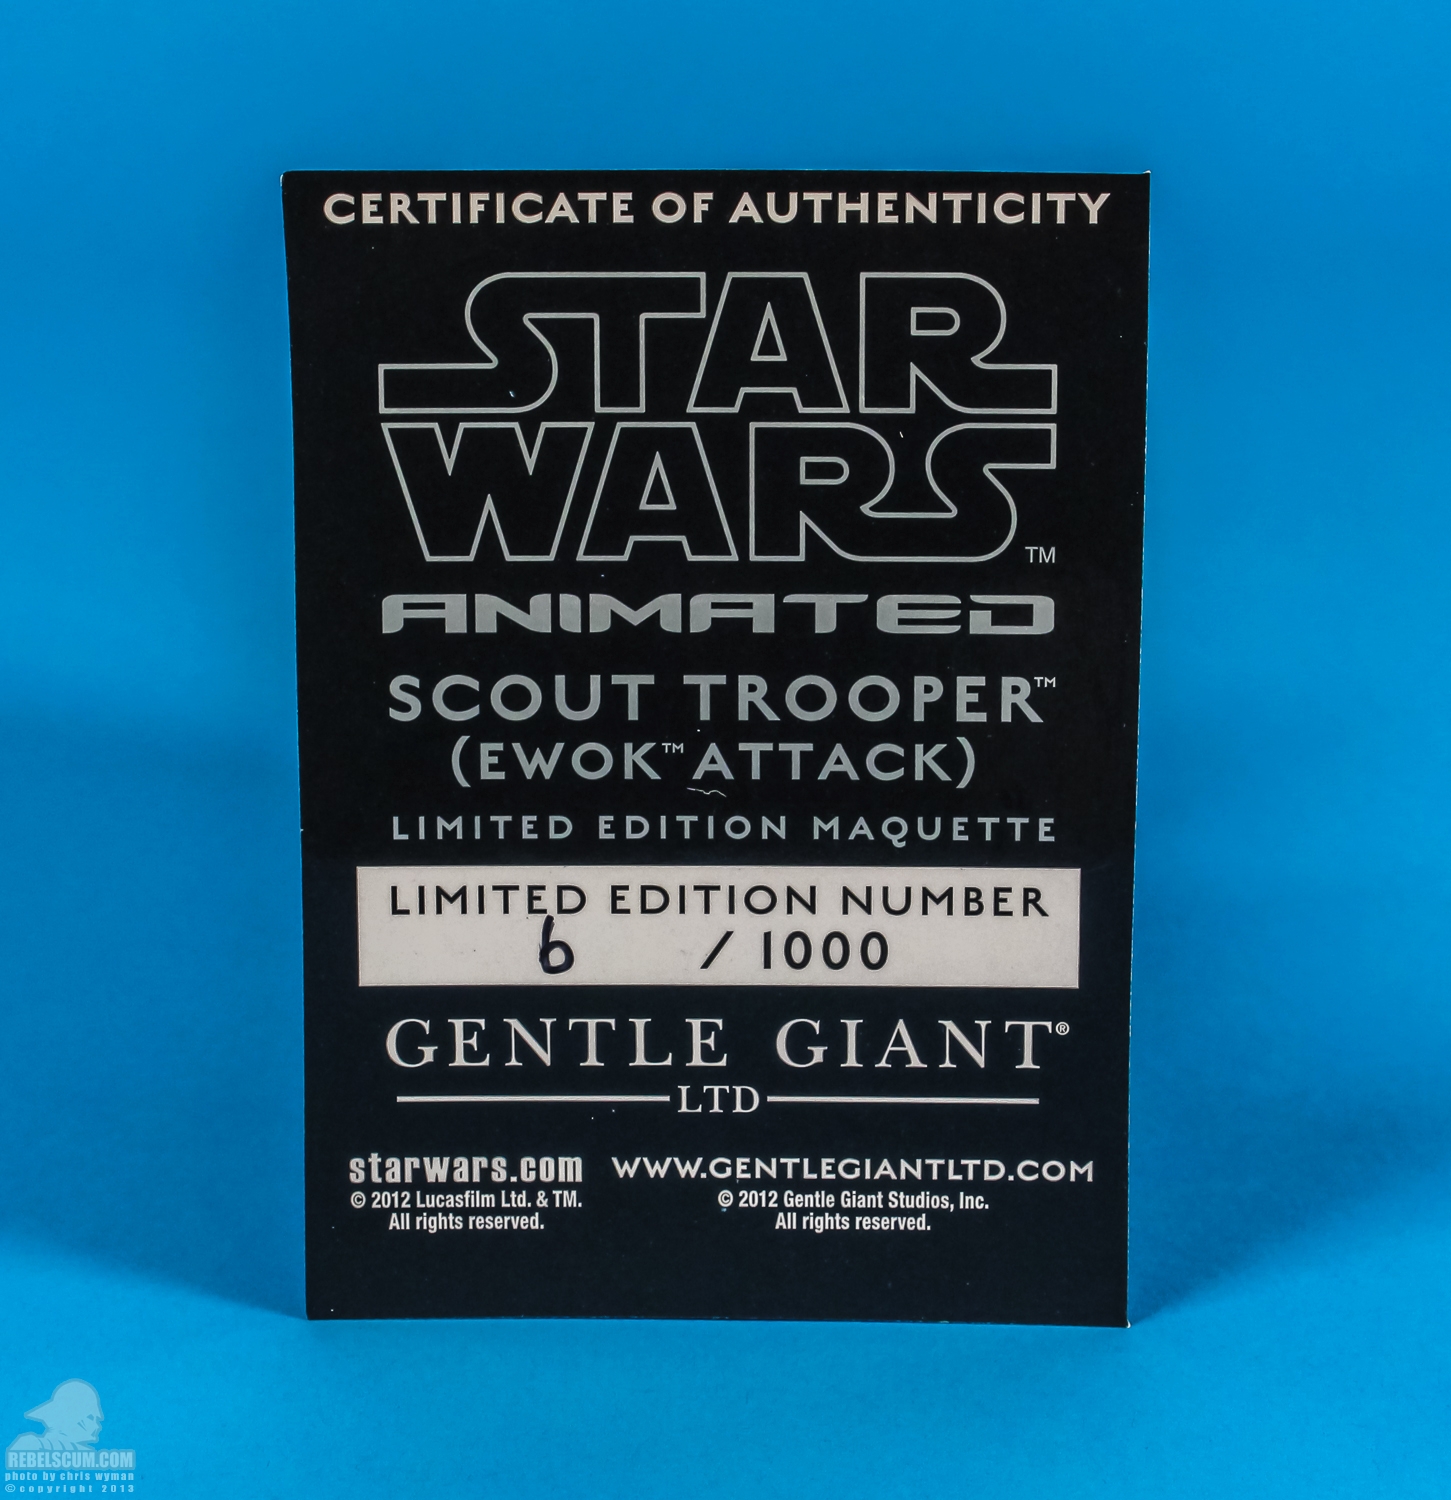 Scout_Trooper_Ewok Attack_Animated_Maquette_Gentle_Giant_Ltd-19.jpg